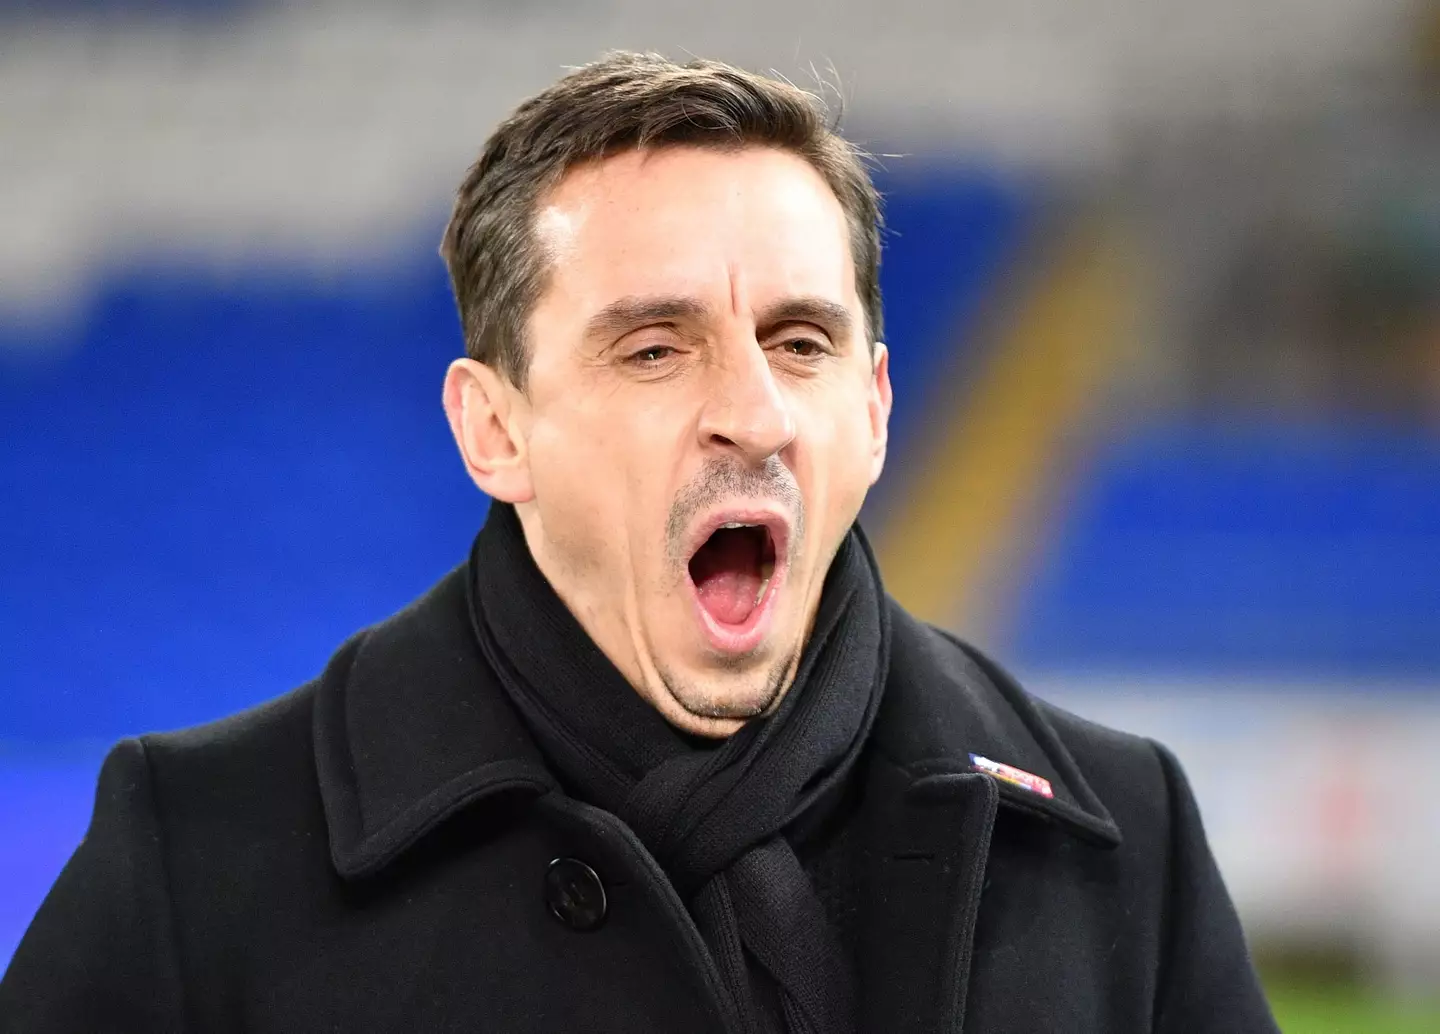 Gary Neville didn't hold back in his assessment of the referee.